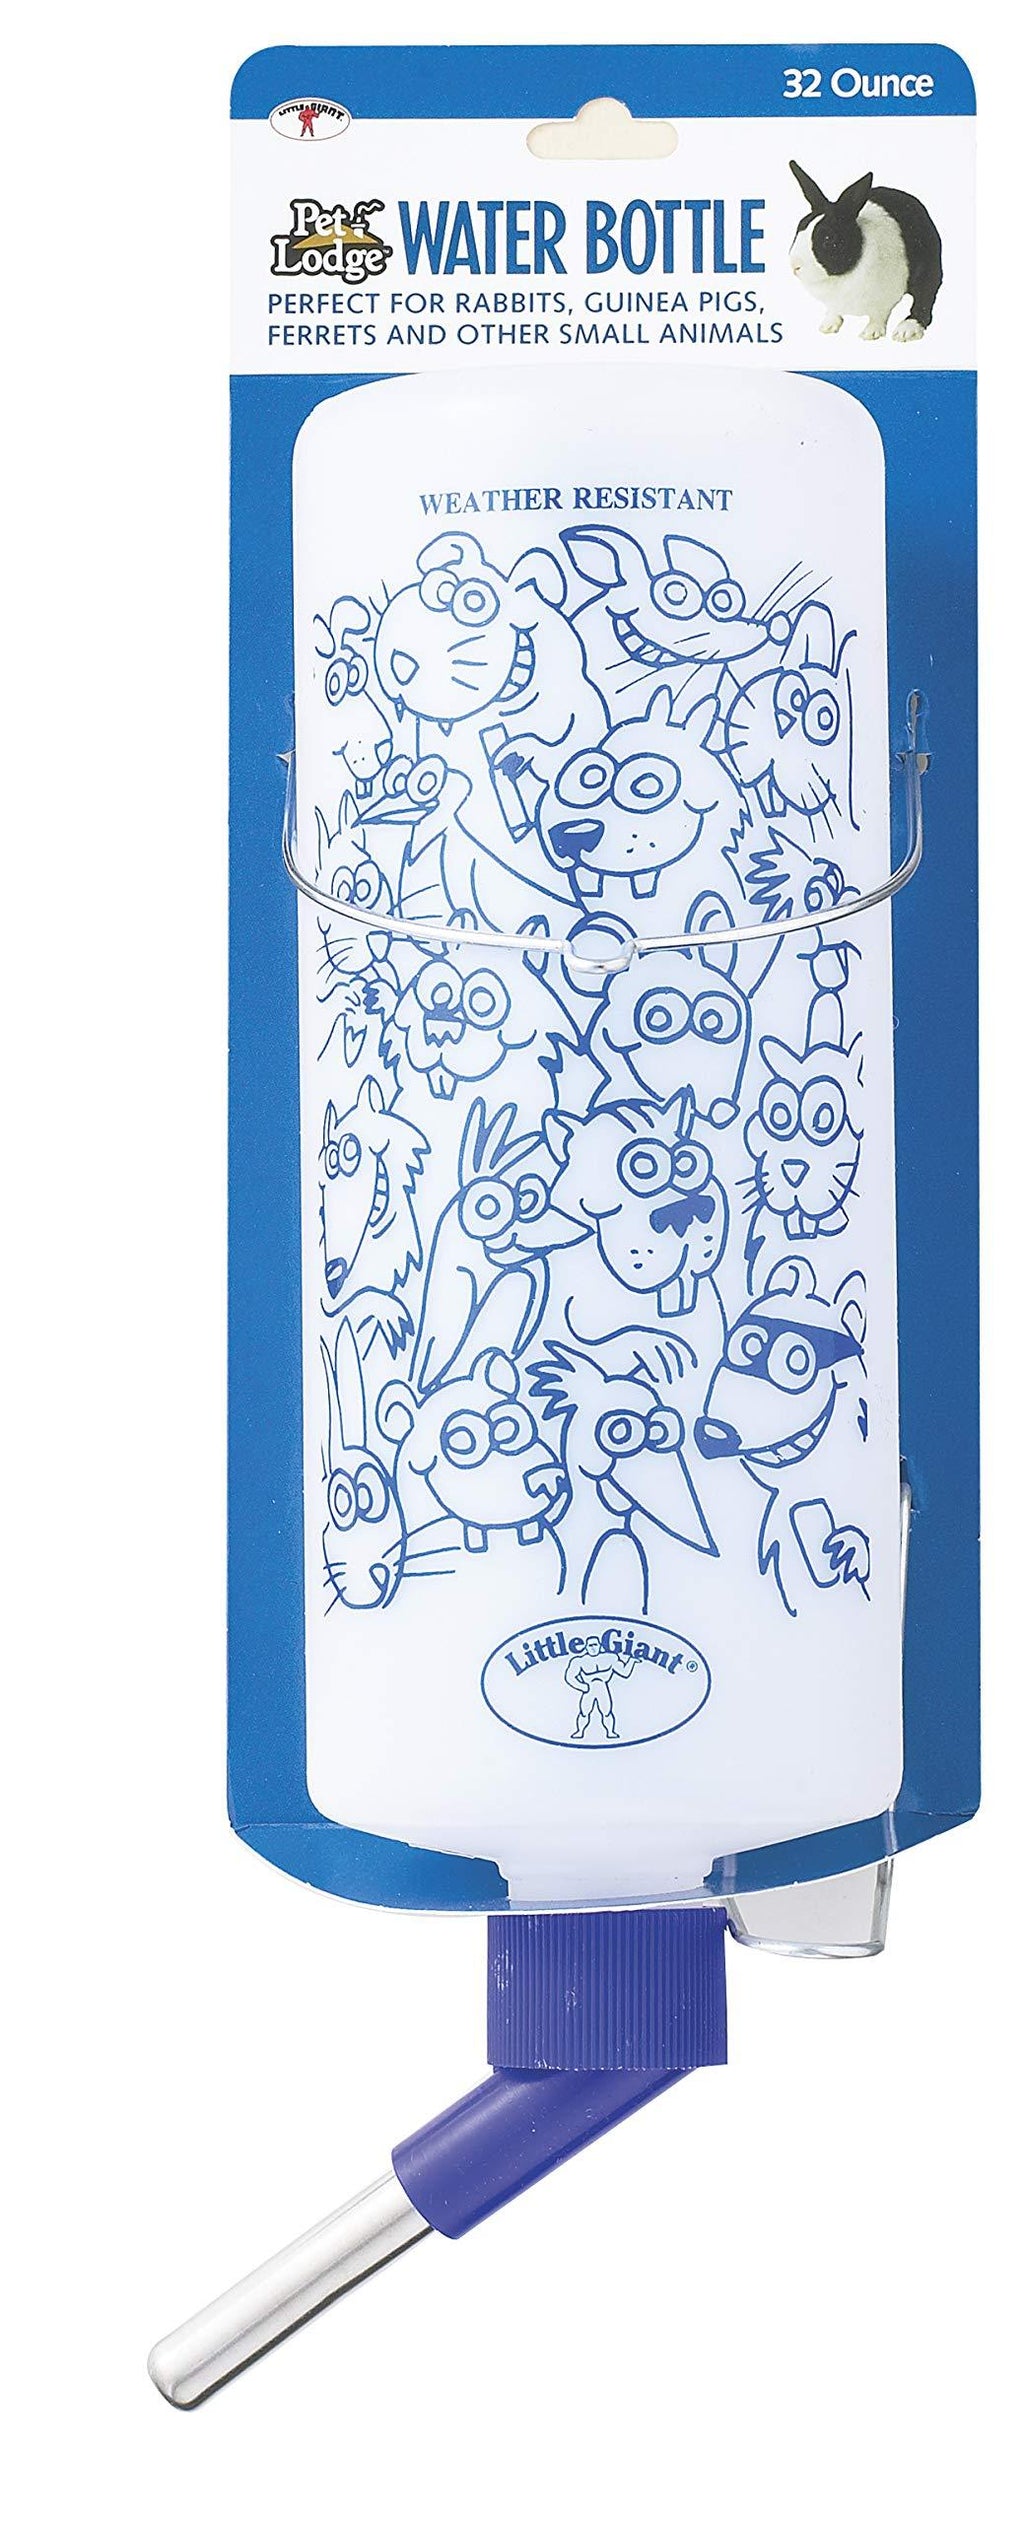 [Australia] - LITTLE GIANT Small Animal Cage Water Bottle - Pet Lodge - Opaque Water Bottle w/Fun Graphics, Great for Indoor Use (32 oz.) (Item No. OPB32) 